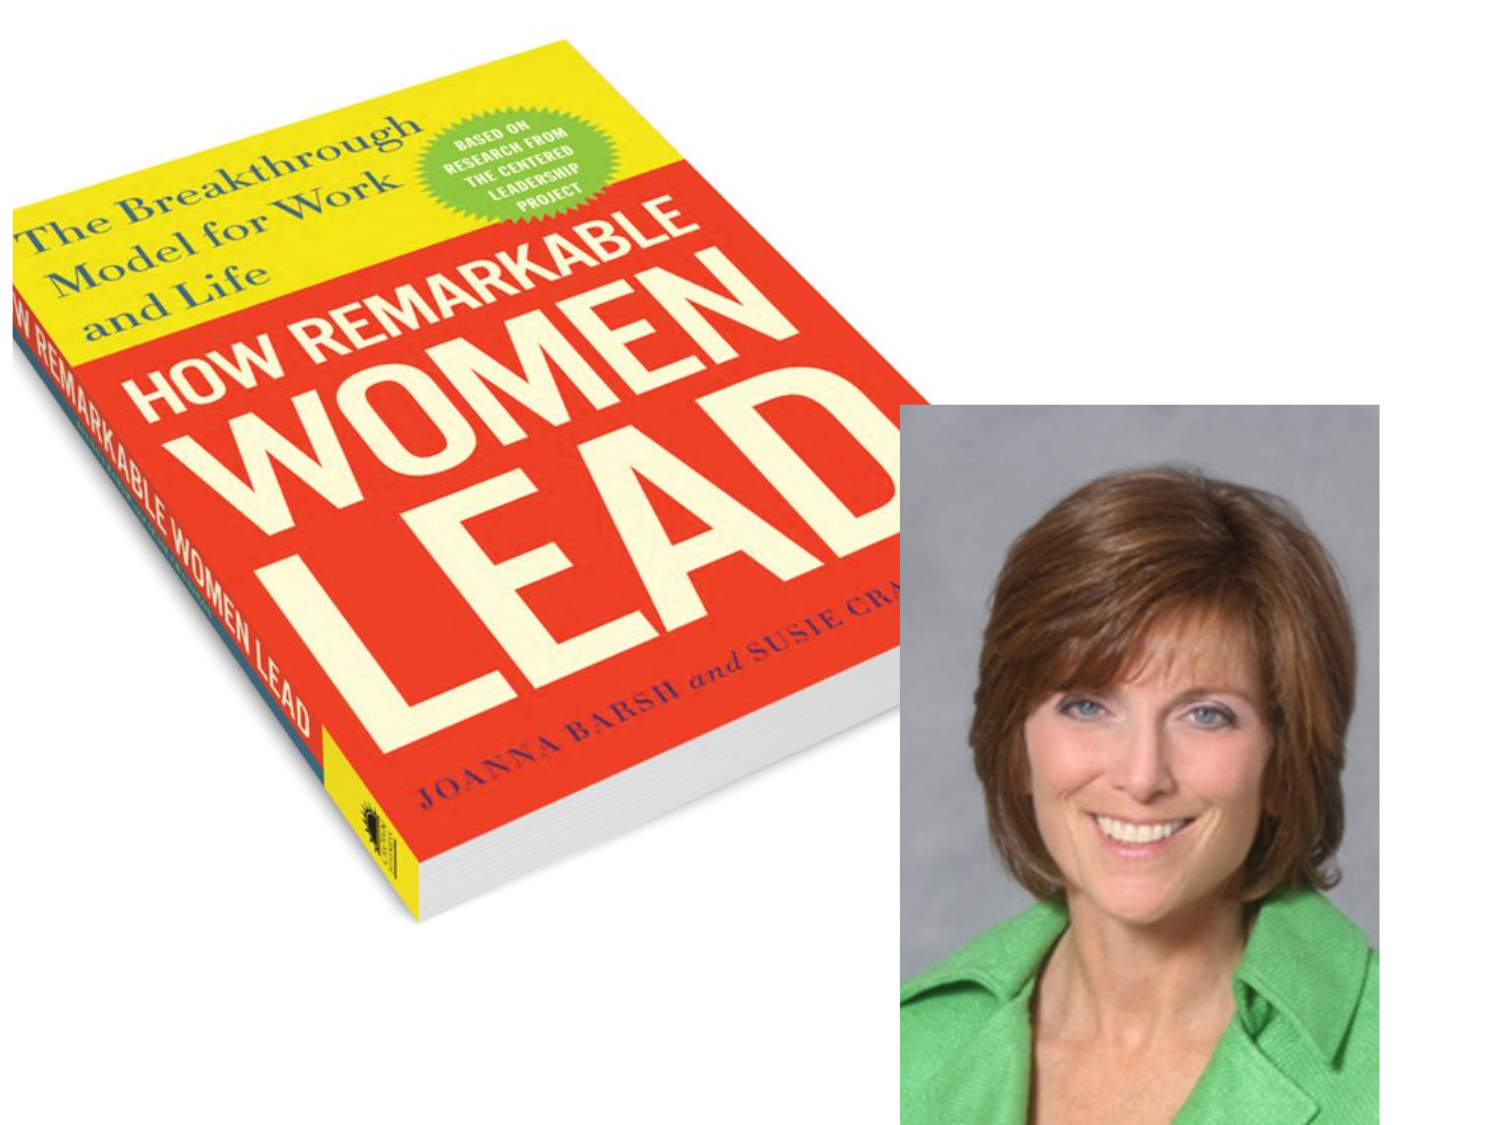  How DO remarkable women lead? Session 2 